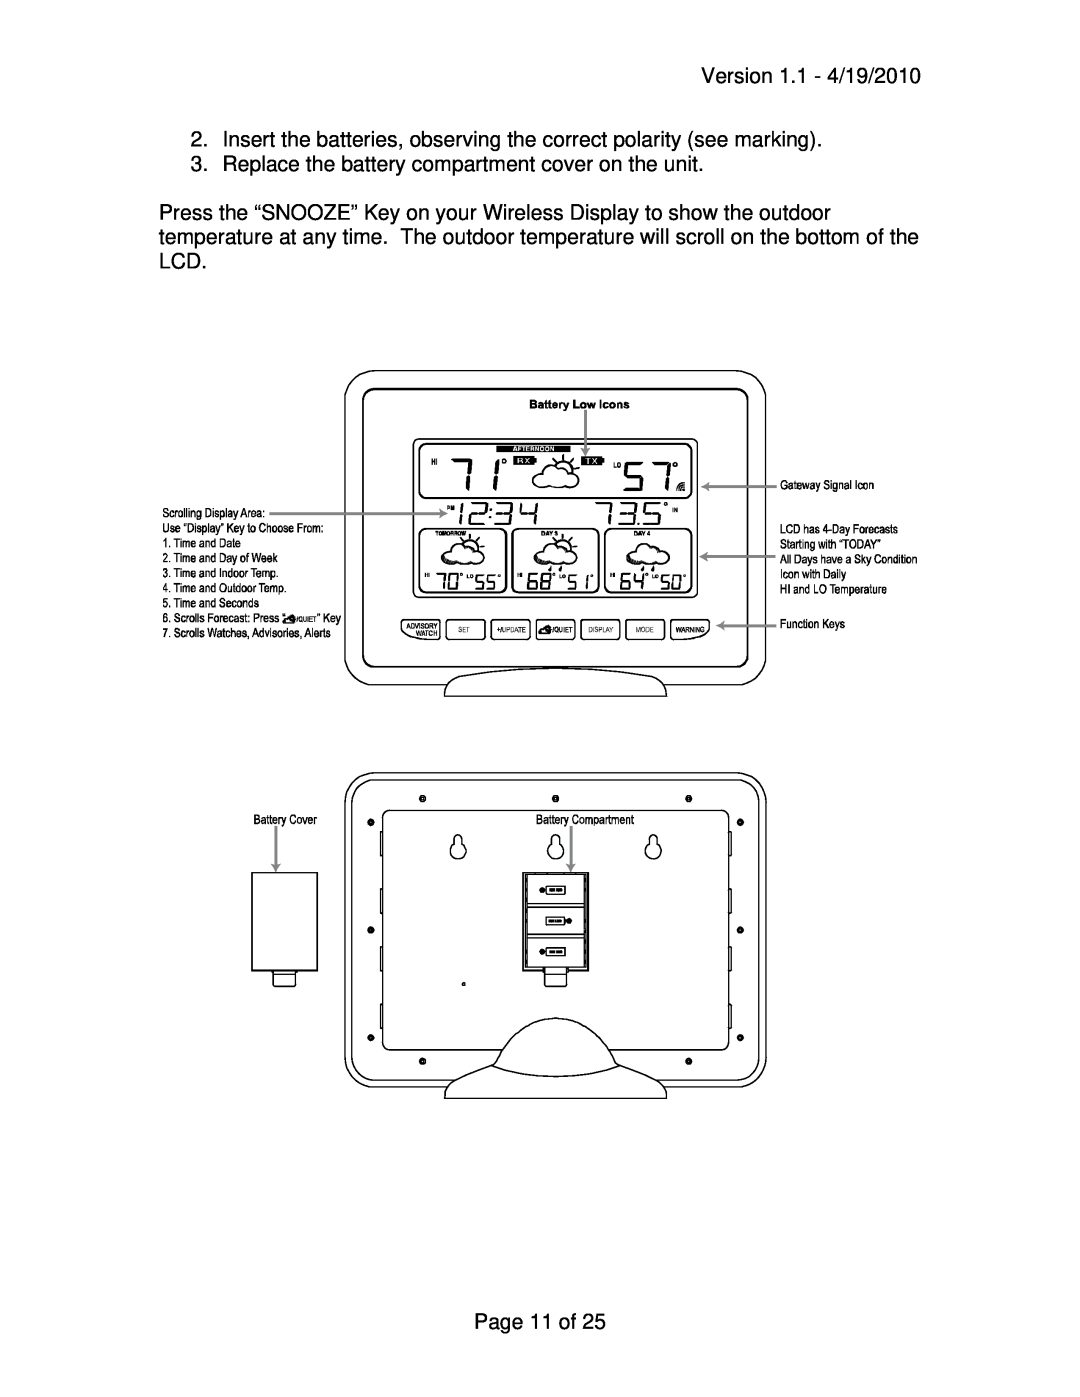 La Crosse Technology WD-9535 owner manual Version 1.1 - 4/19/2010, Page 11 of 